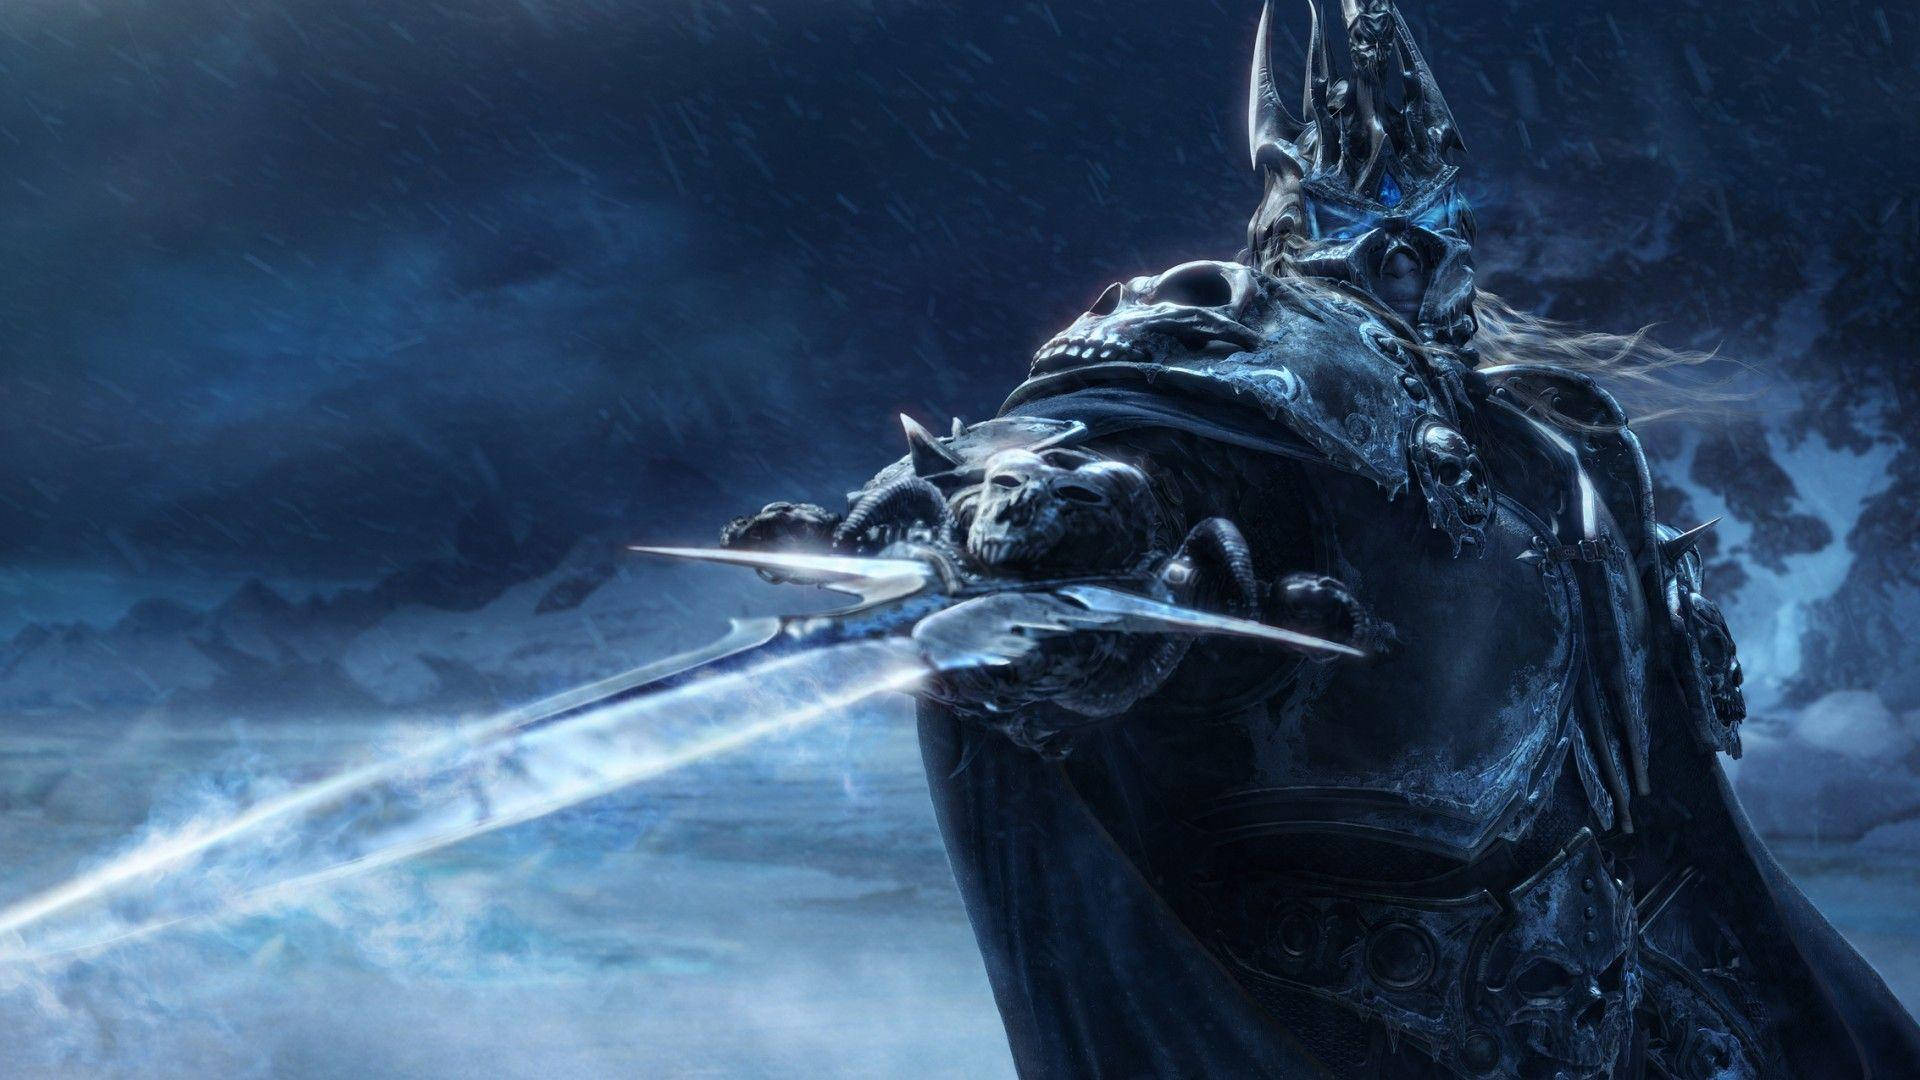 Cold Weather Flying: Learning to Fly in Wrath of the Lich King